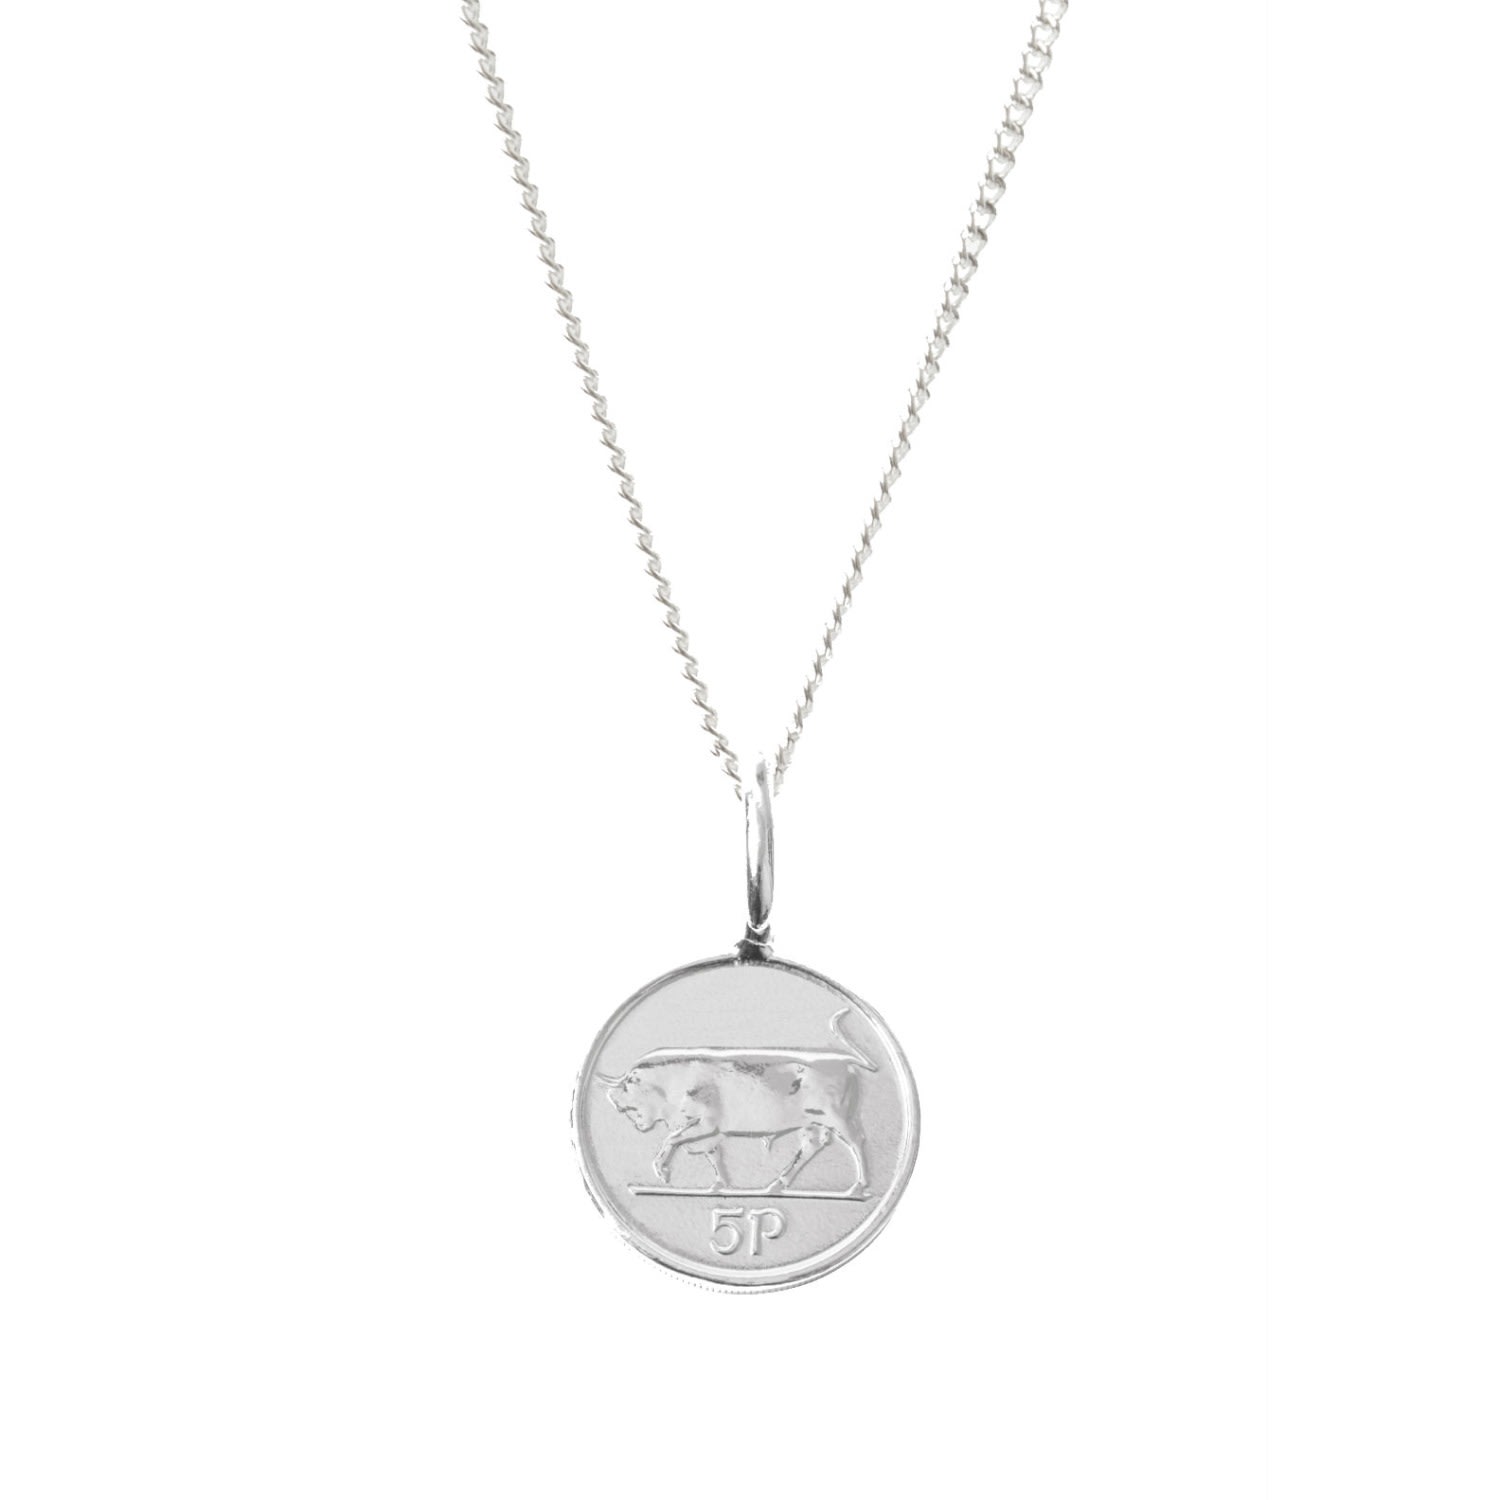 Men's Irish 5P Coin & Chain In Sterling Silver Katie Mullally